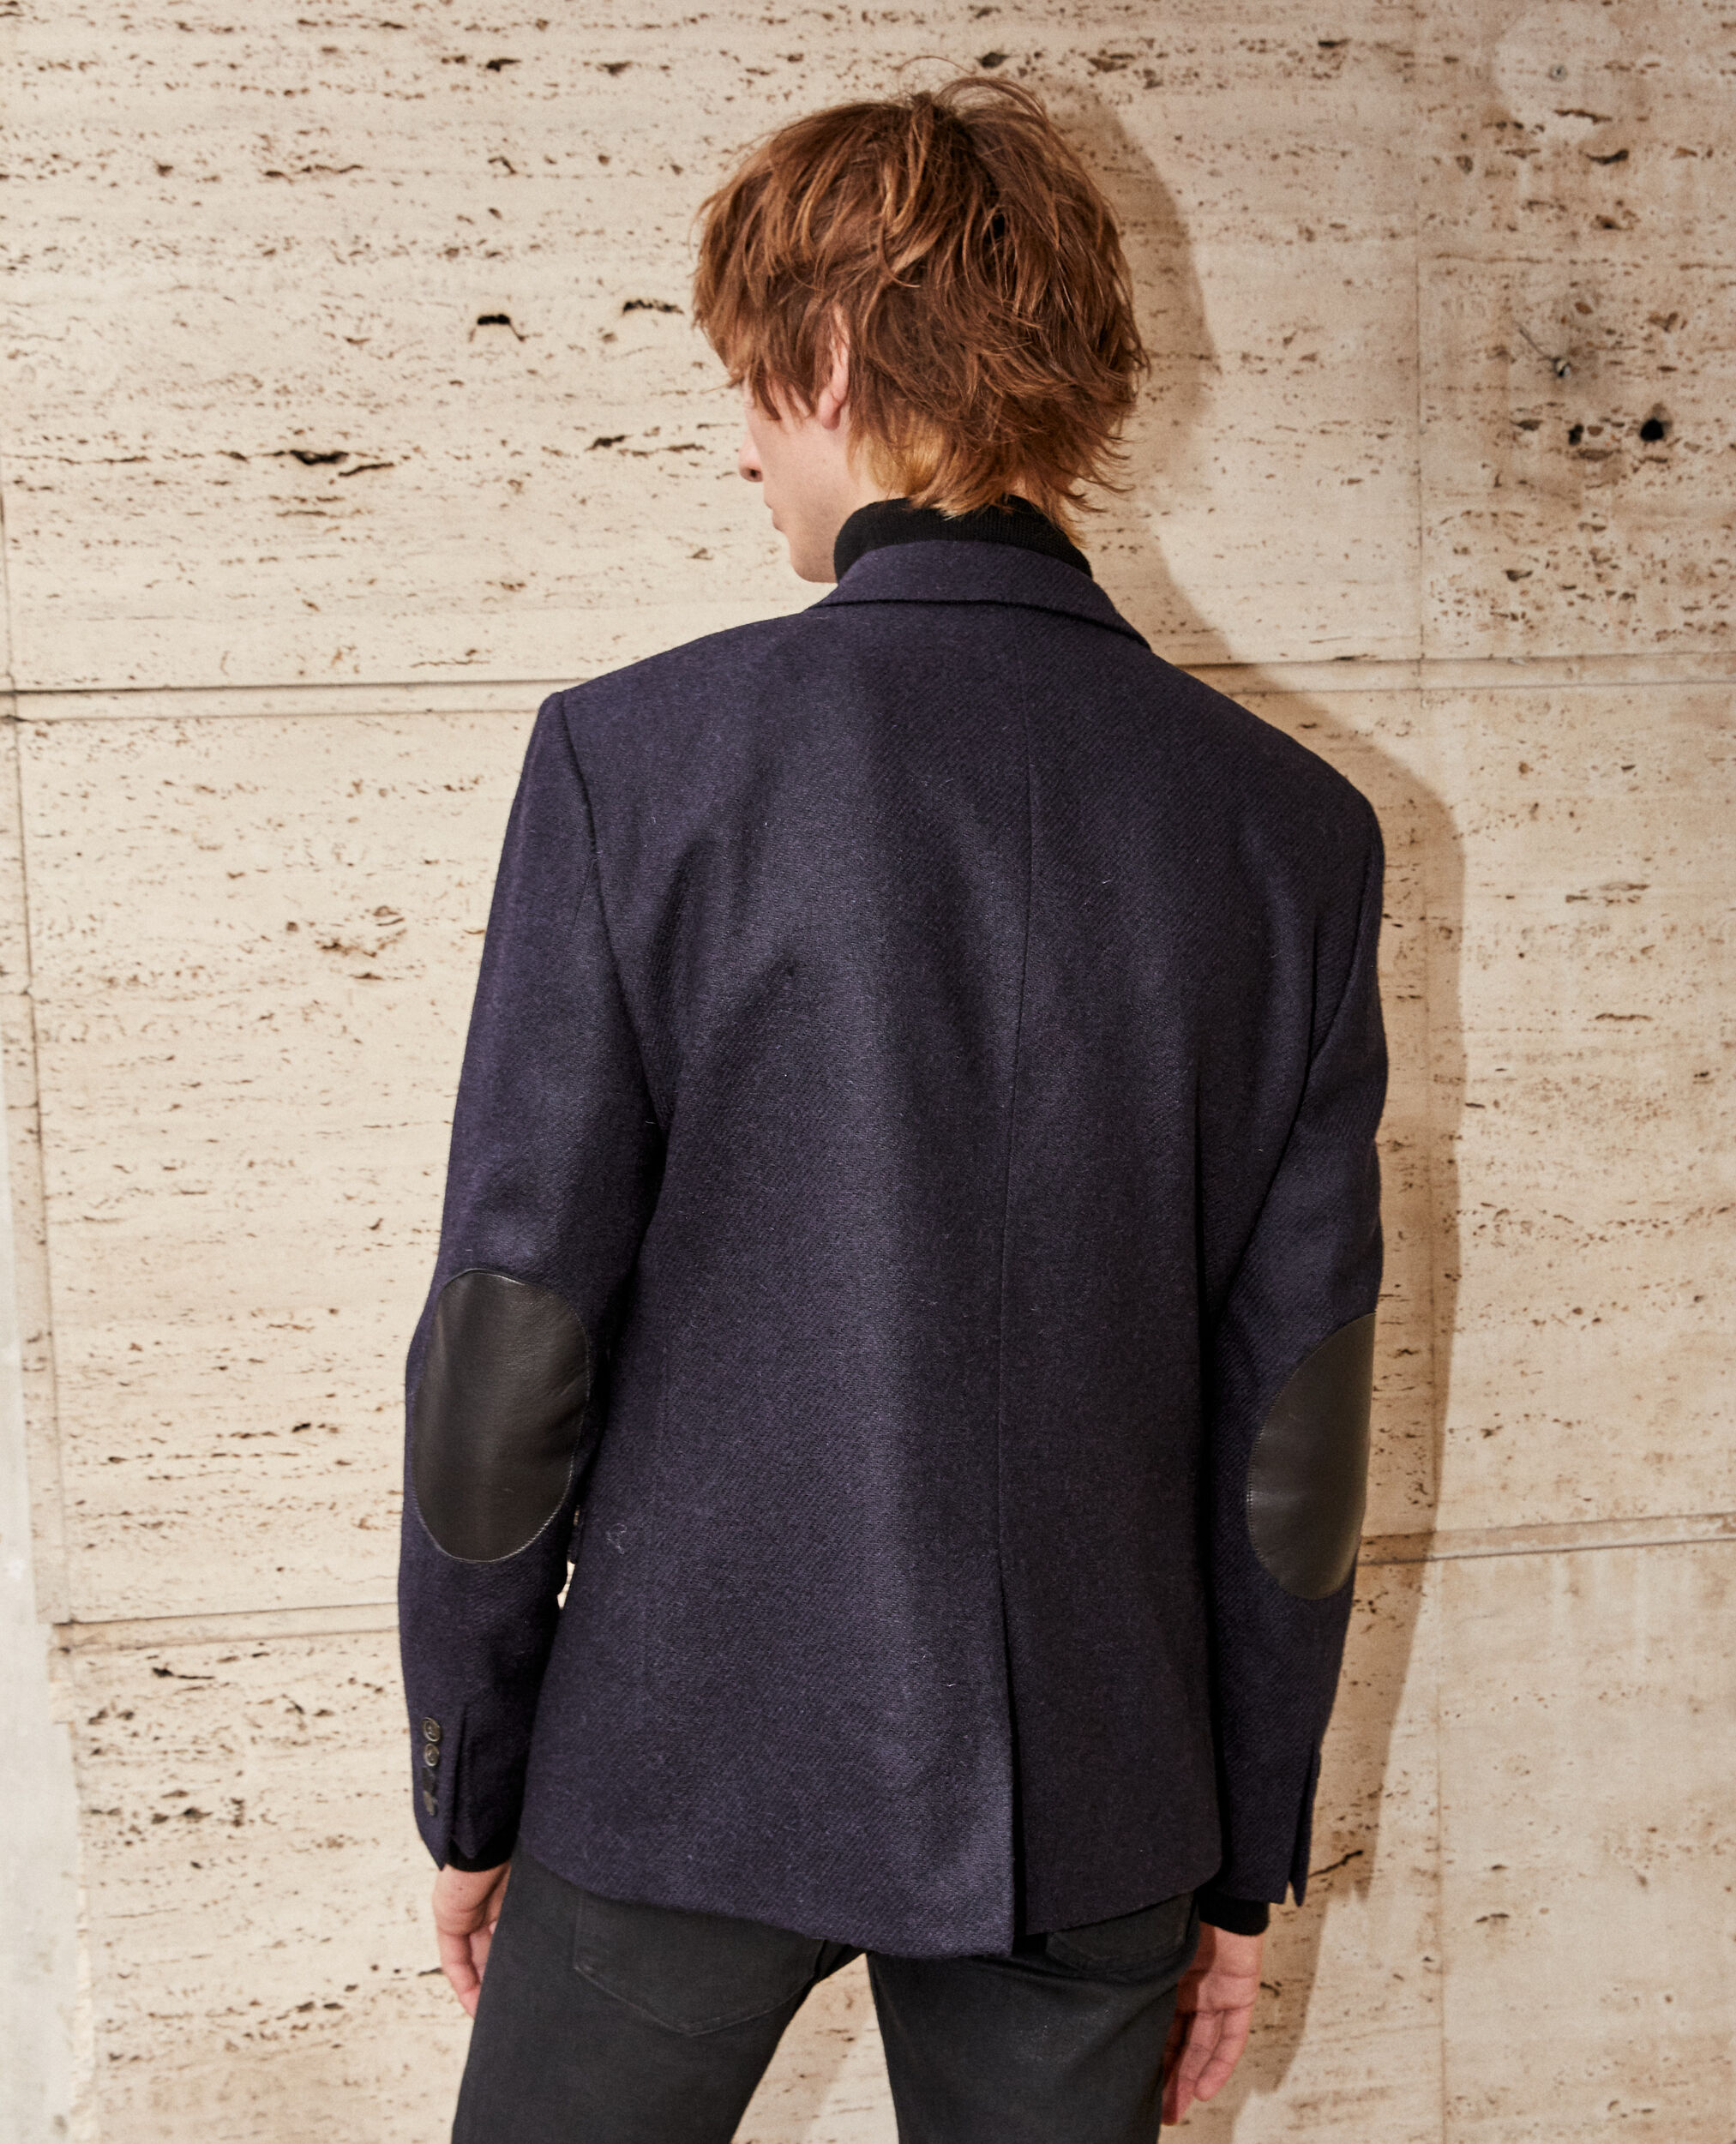 Black wool jacket with leather elbow patches, DARK NAVY, hi-res image number null